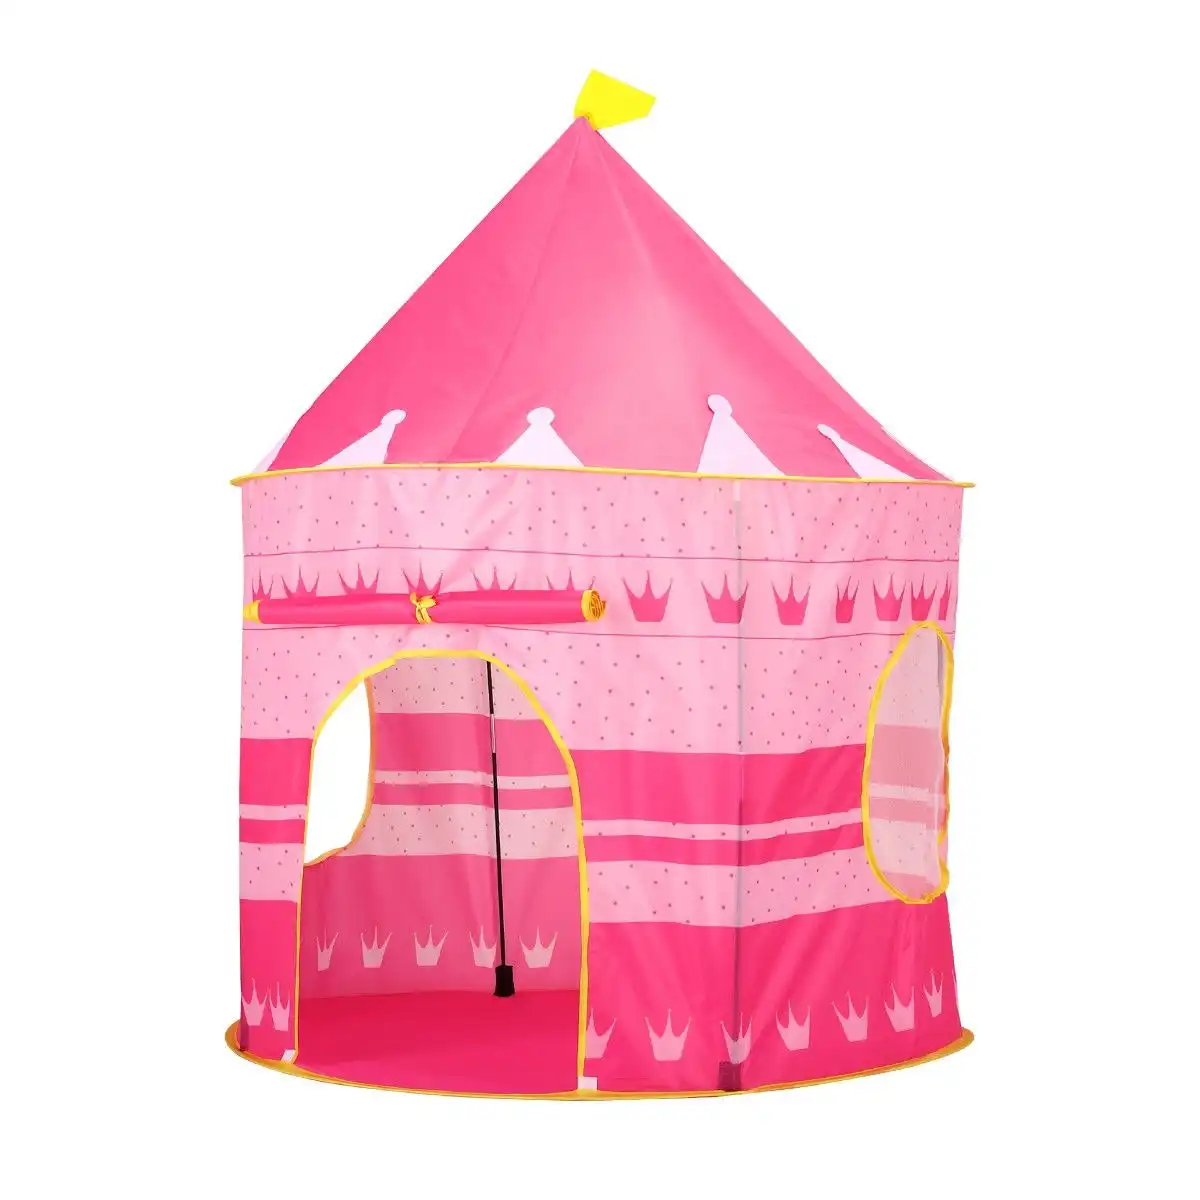 Ausway Kids Play Tent Princess Castle for Girls Children Play House Indoor Outdoor Game Pink